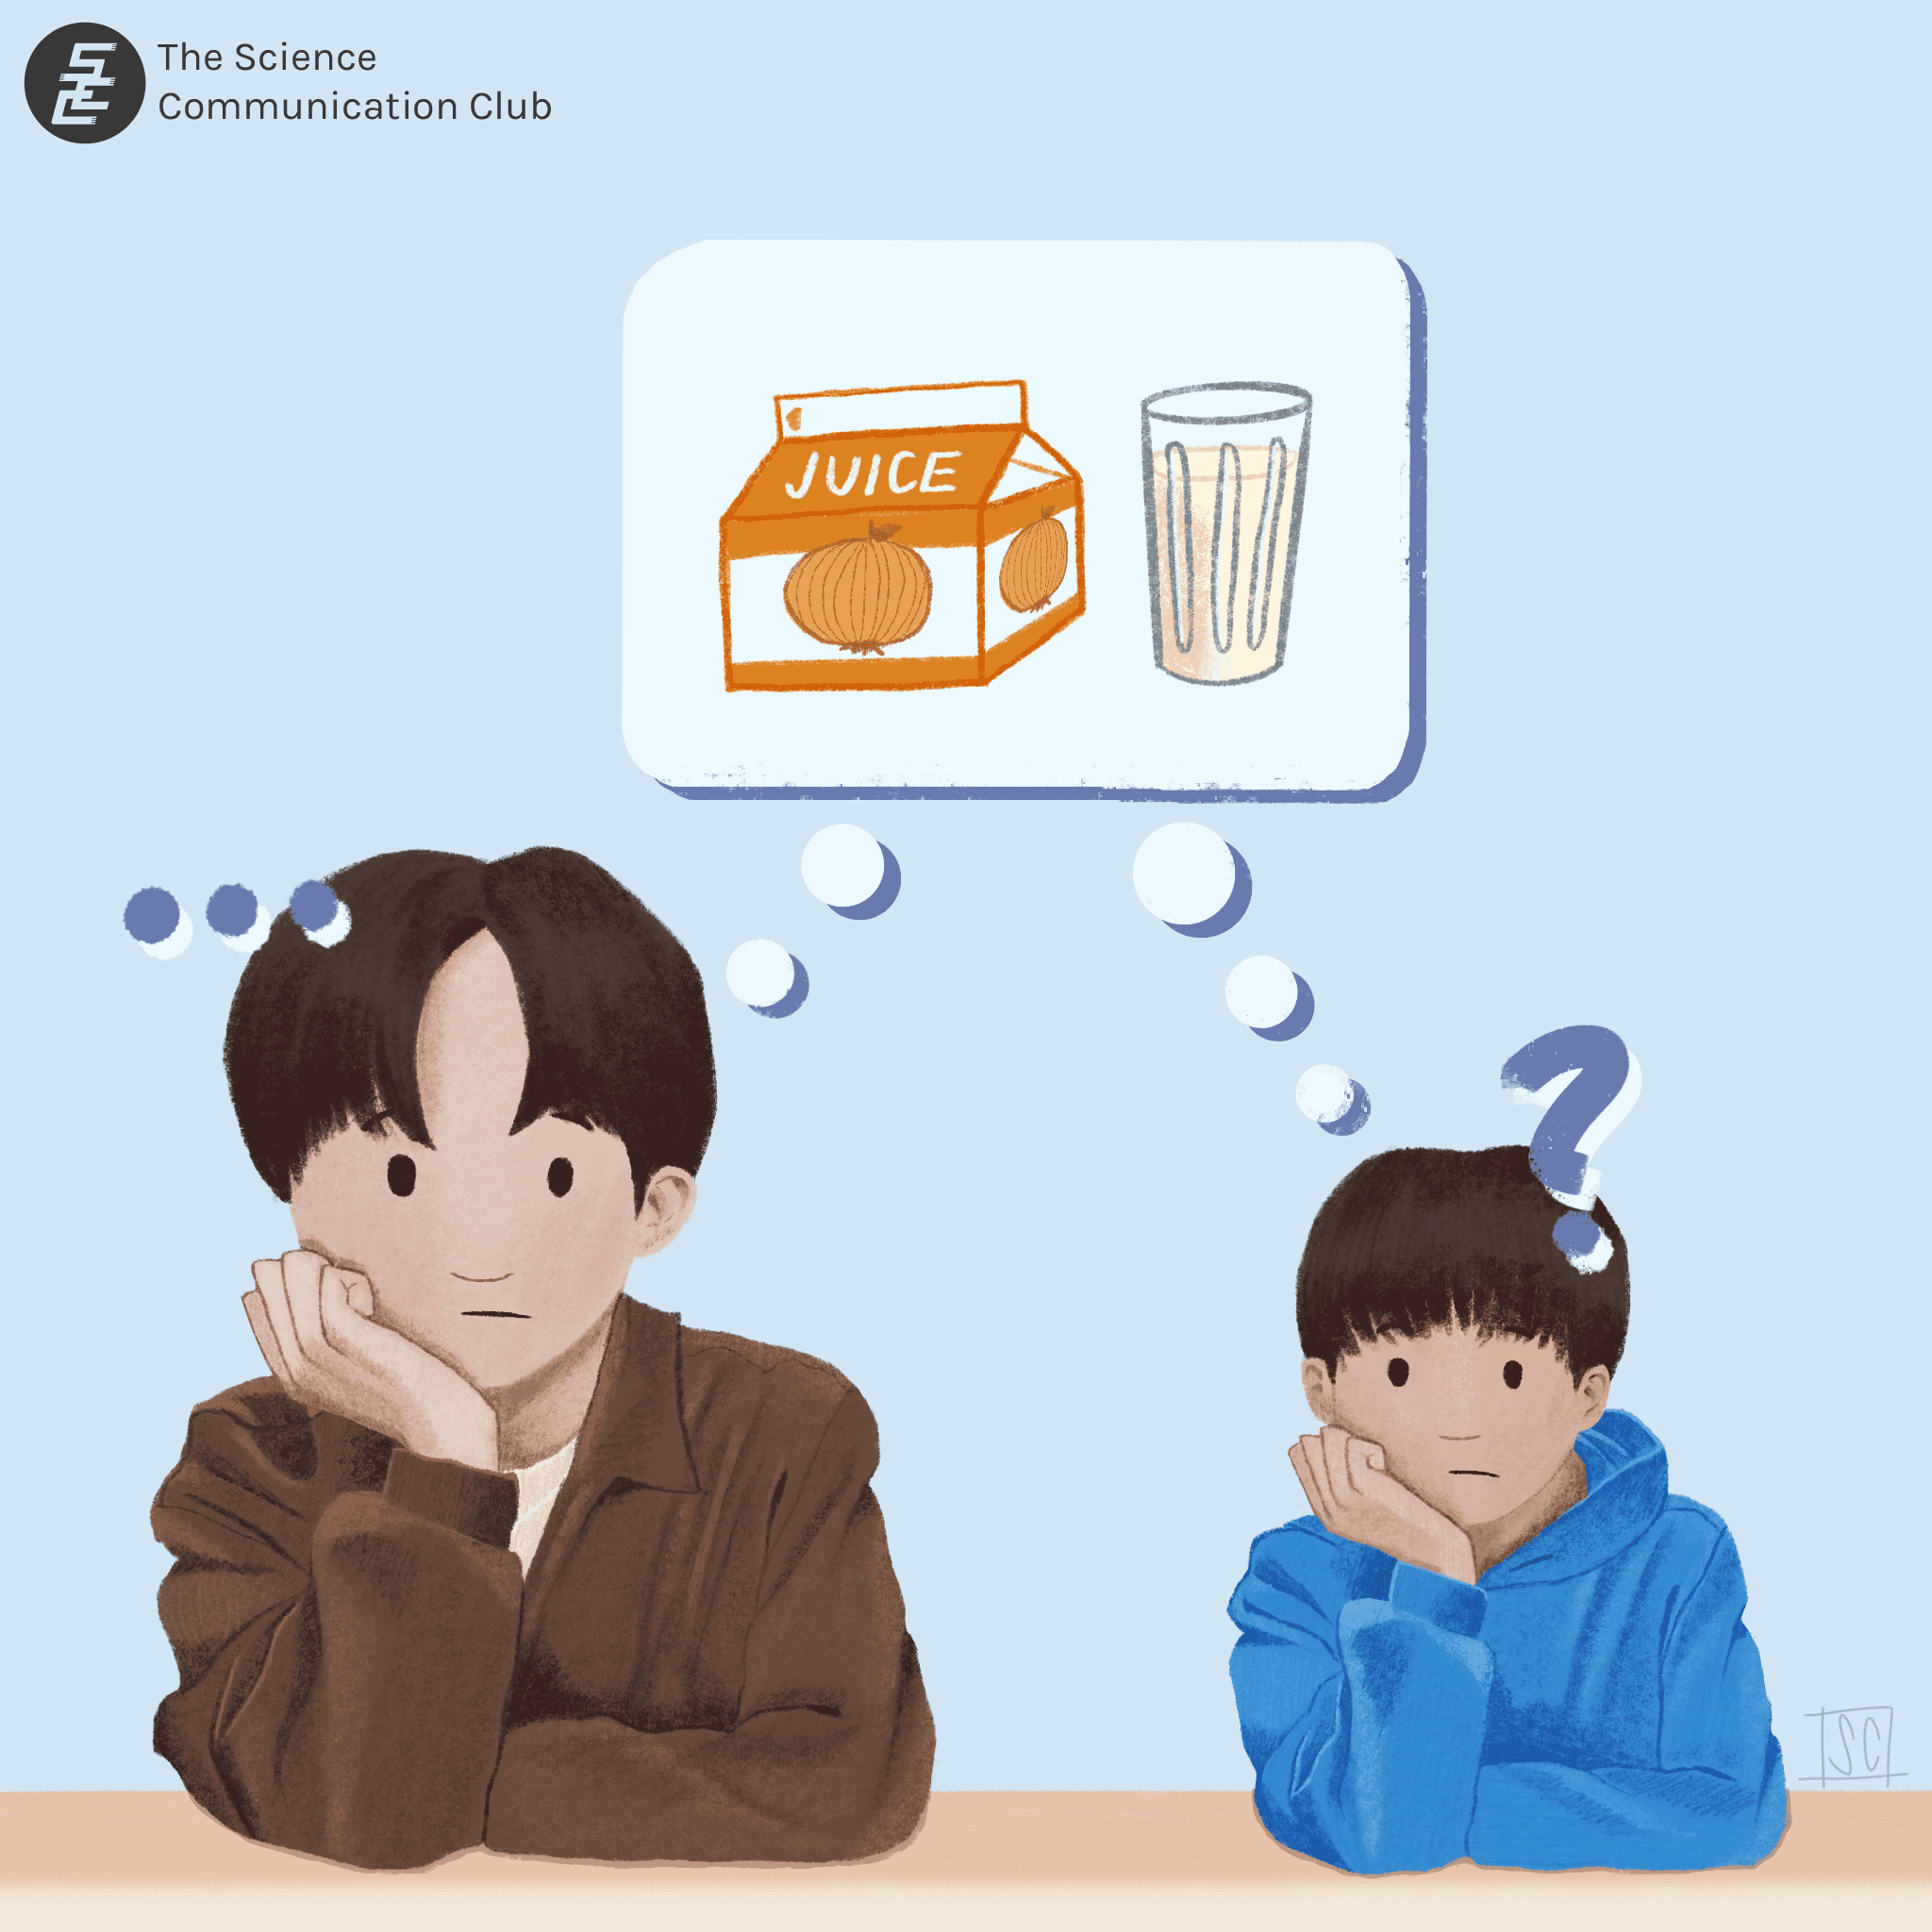 A man and a boy sit next to each other in thought. A thought bubble containing a juice carton with an onion on it and a glass of juice connects them. There is an ellipsis above the man’s head, and a question mark above the boy's head.